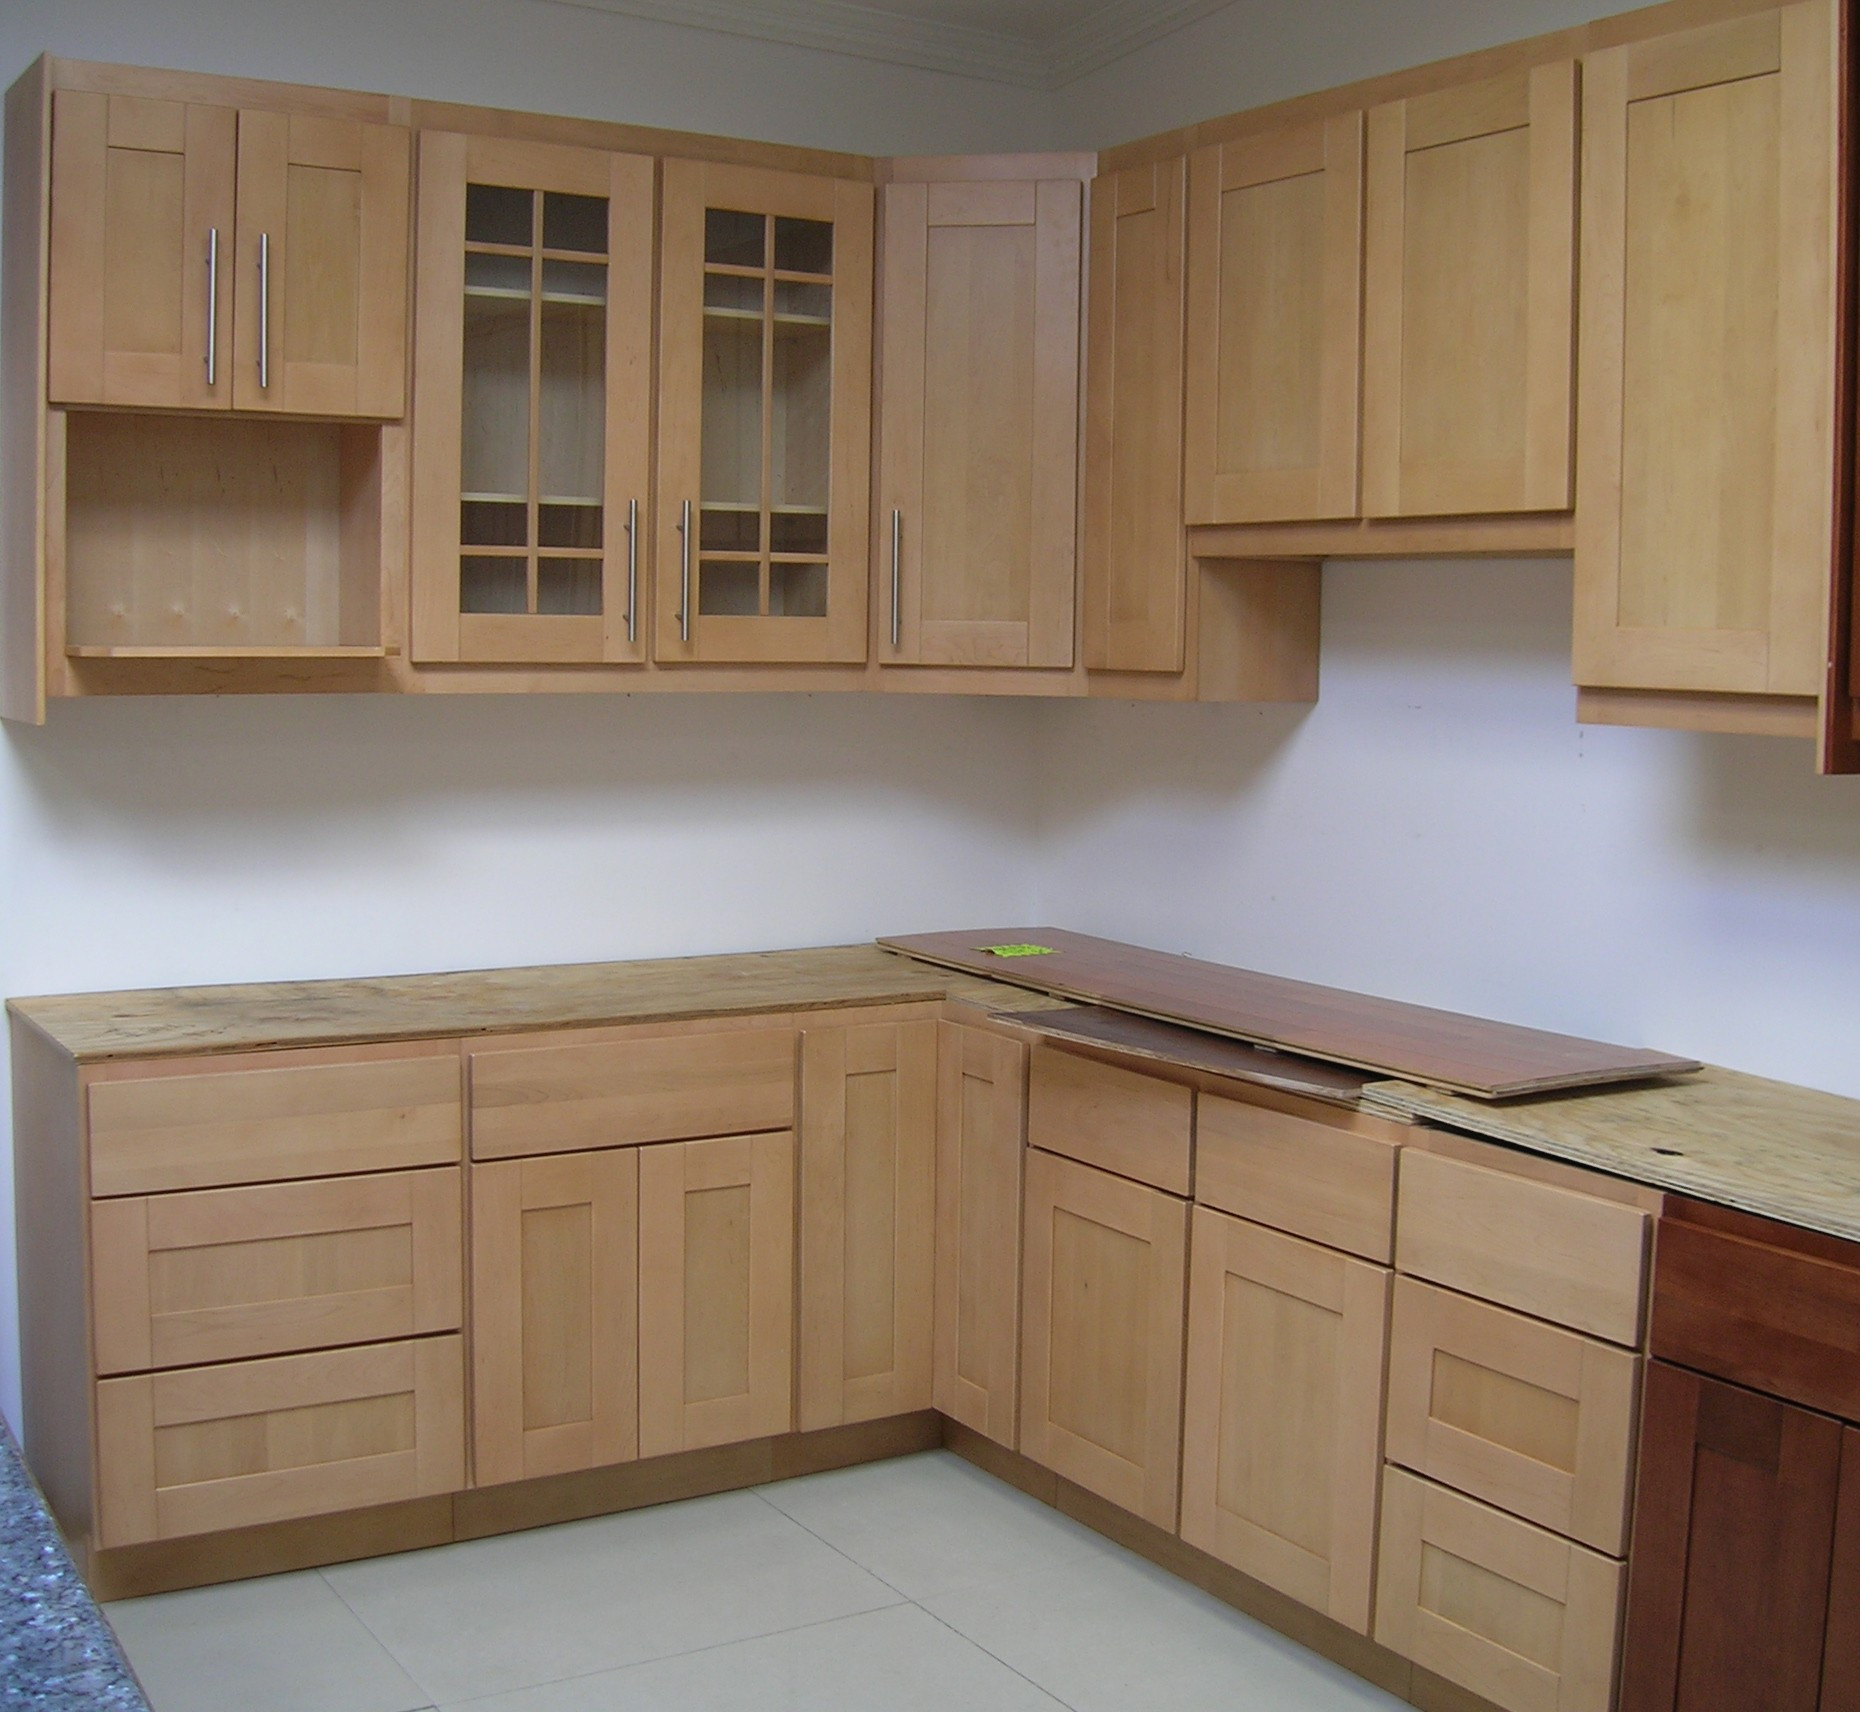 Unfinished Kitchen Cabinets
 Unfinished Kitchen Cabinets – Wow Blog